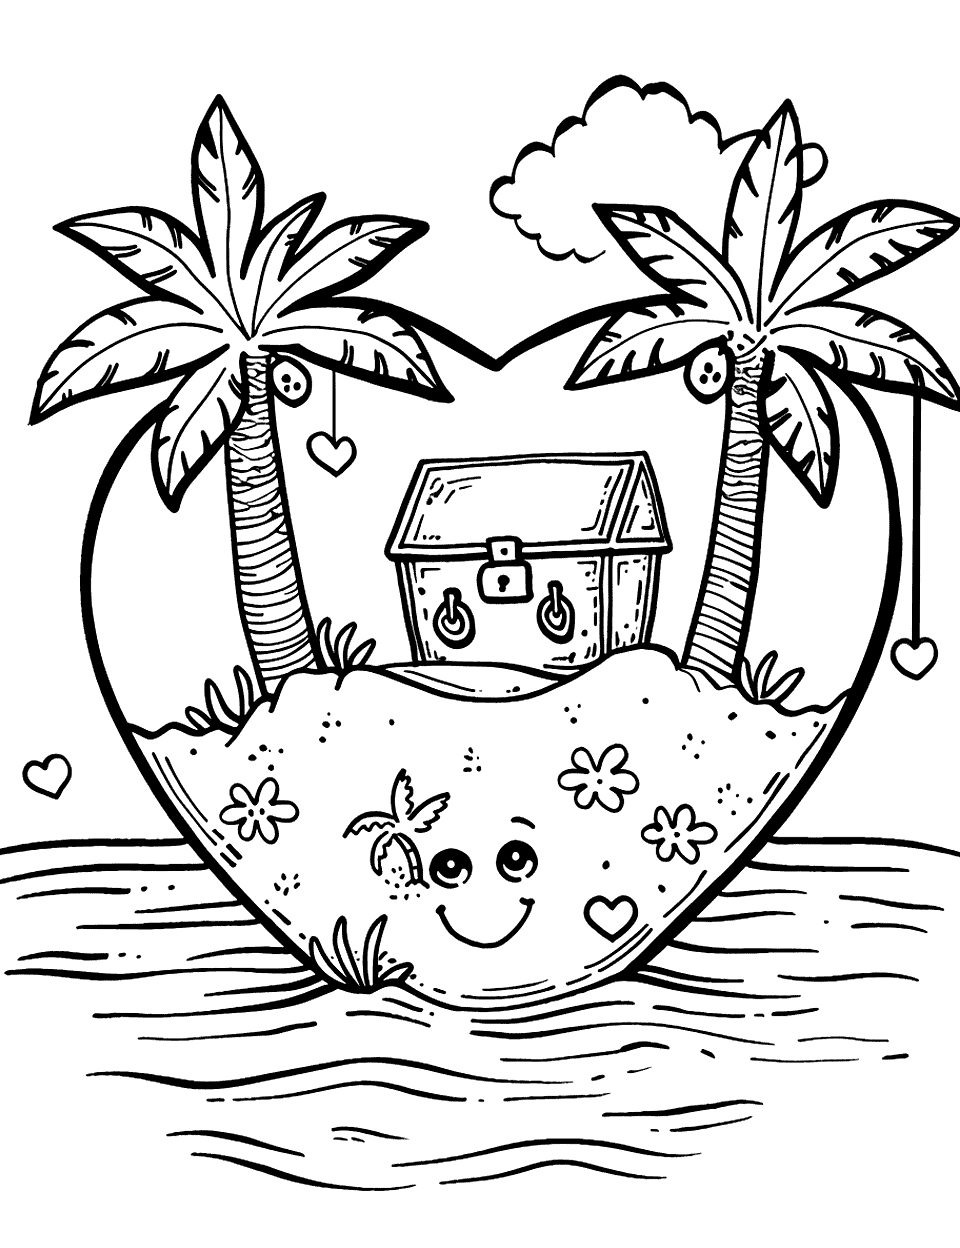 Heart-Shaped Island Adventure Shapes Coloring Page - An island in the shape of a heart with a treasure chest and palm trees.